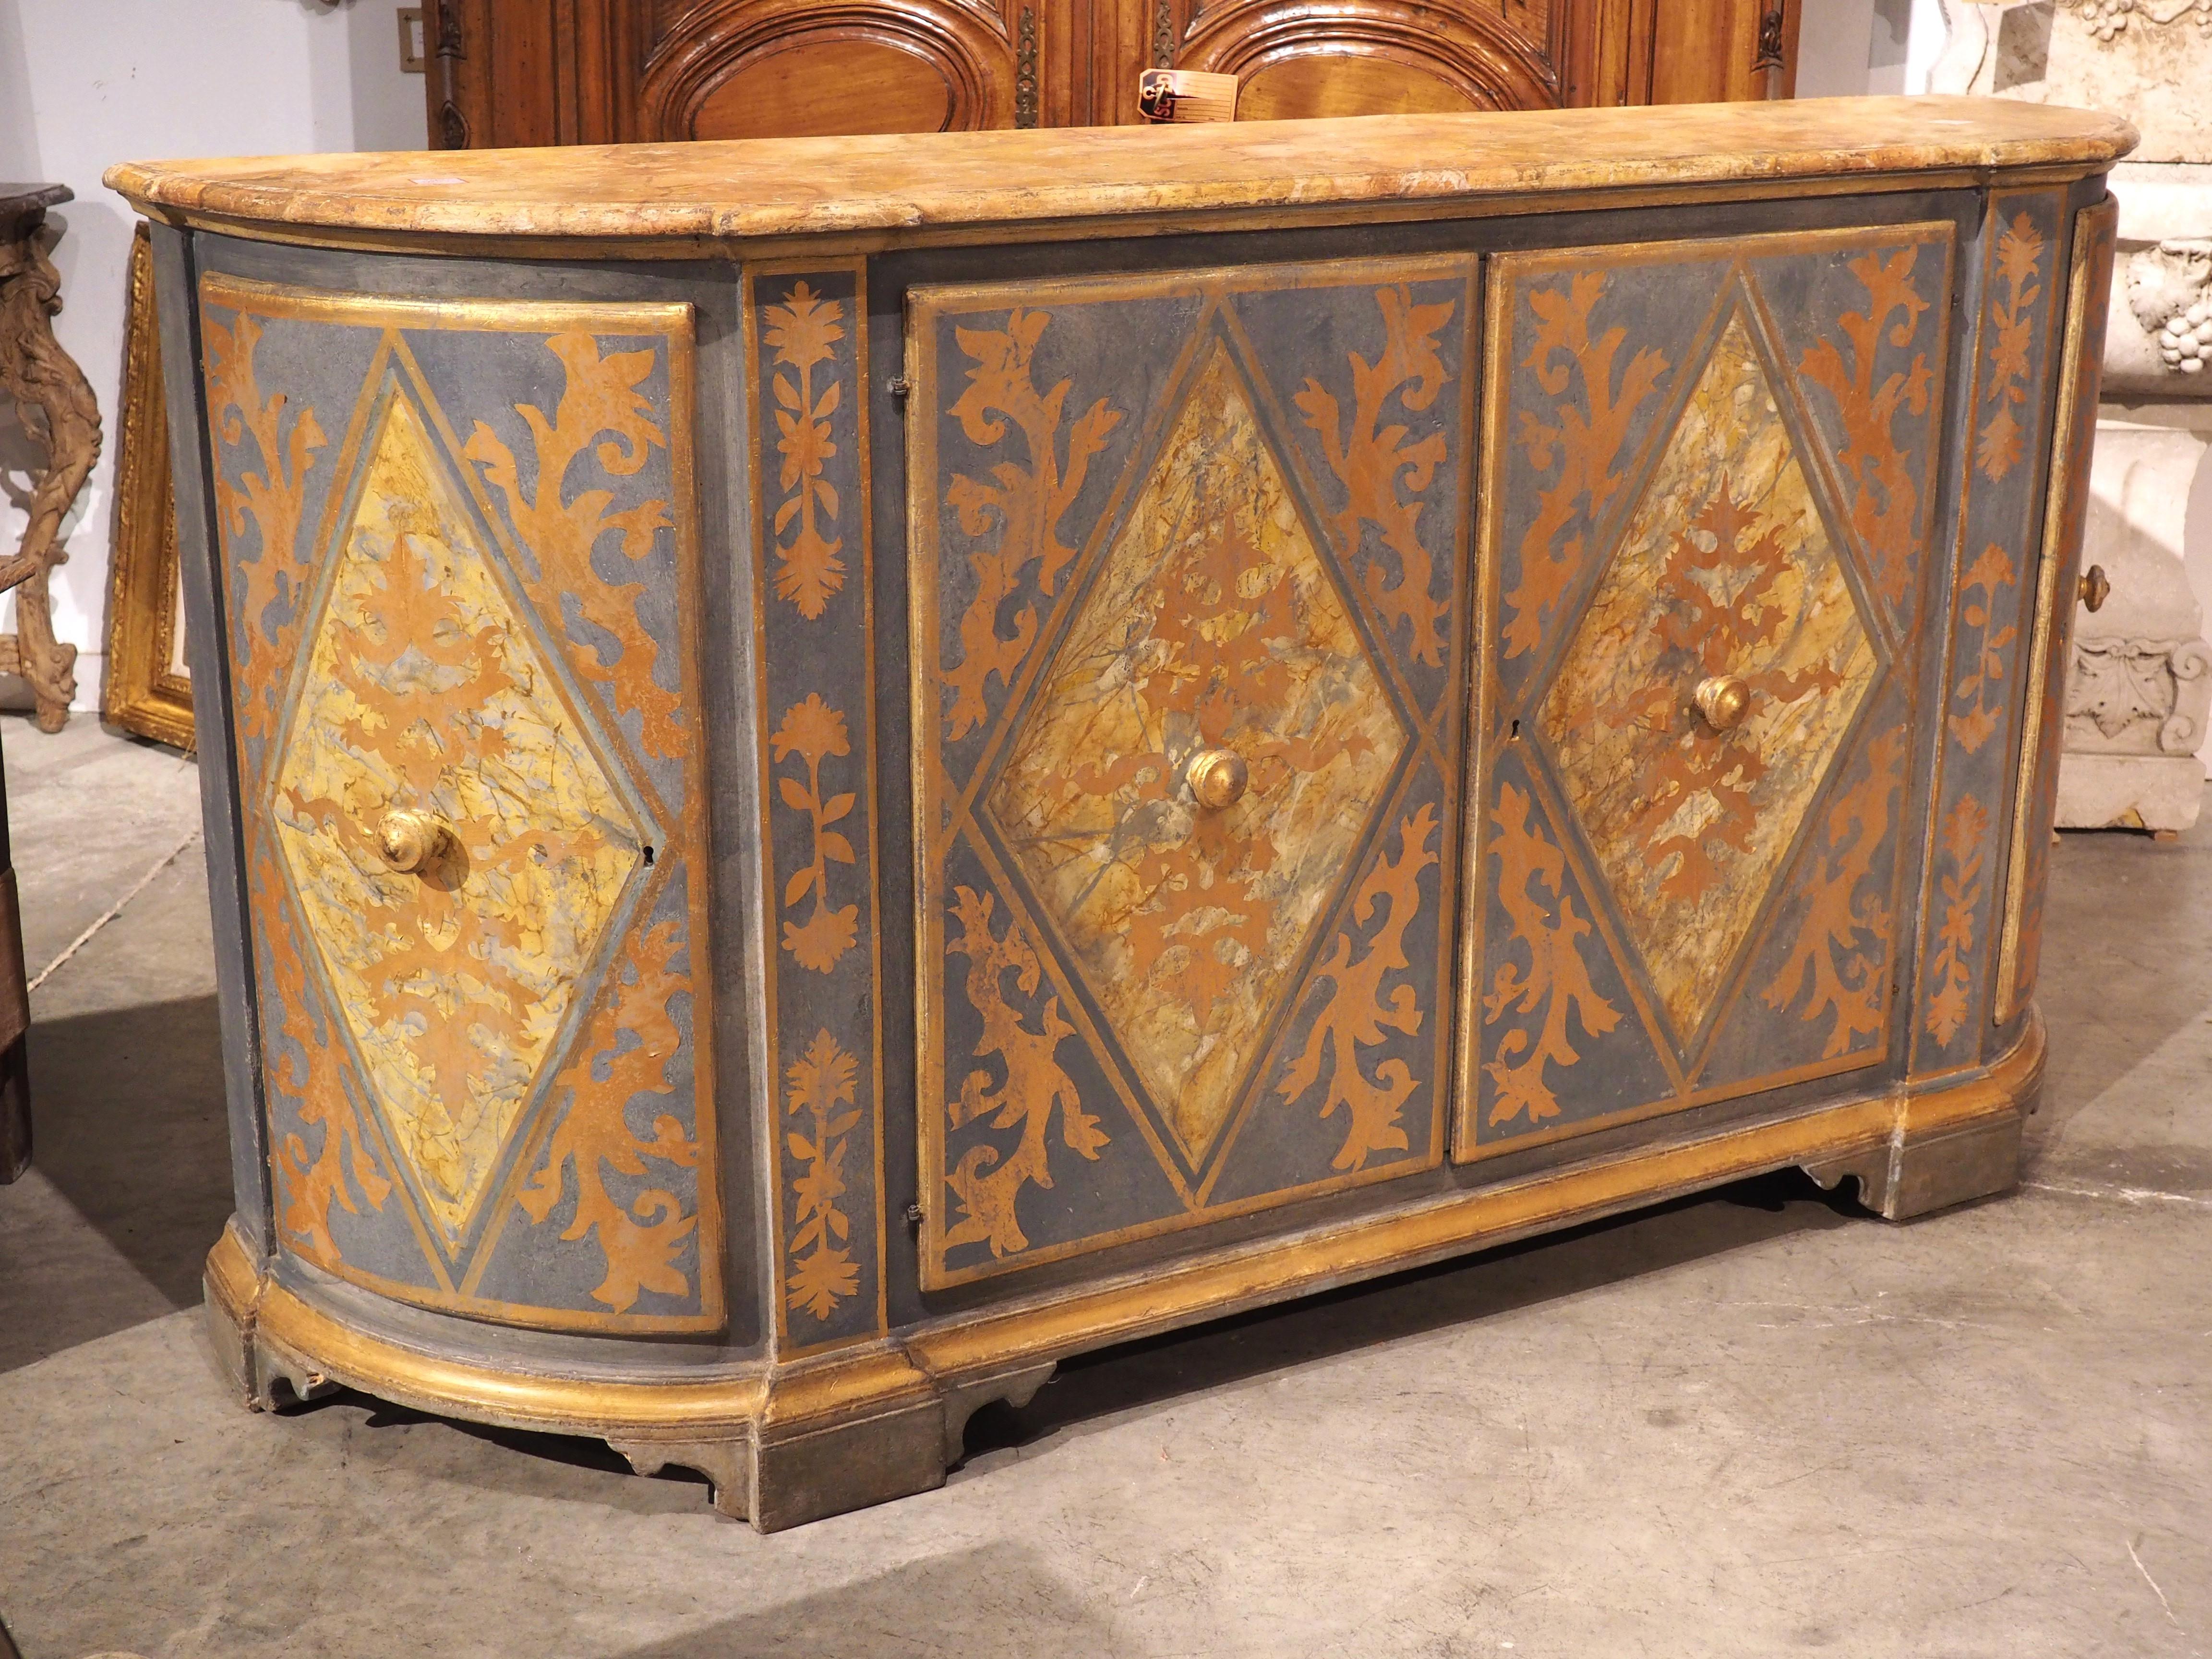 19th Century 4-Door Powder Blue and Gold Painted Credenza from Italy For Sale 9